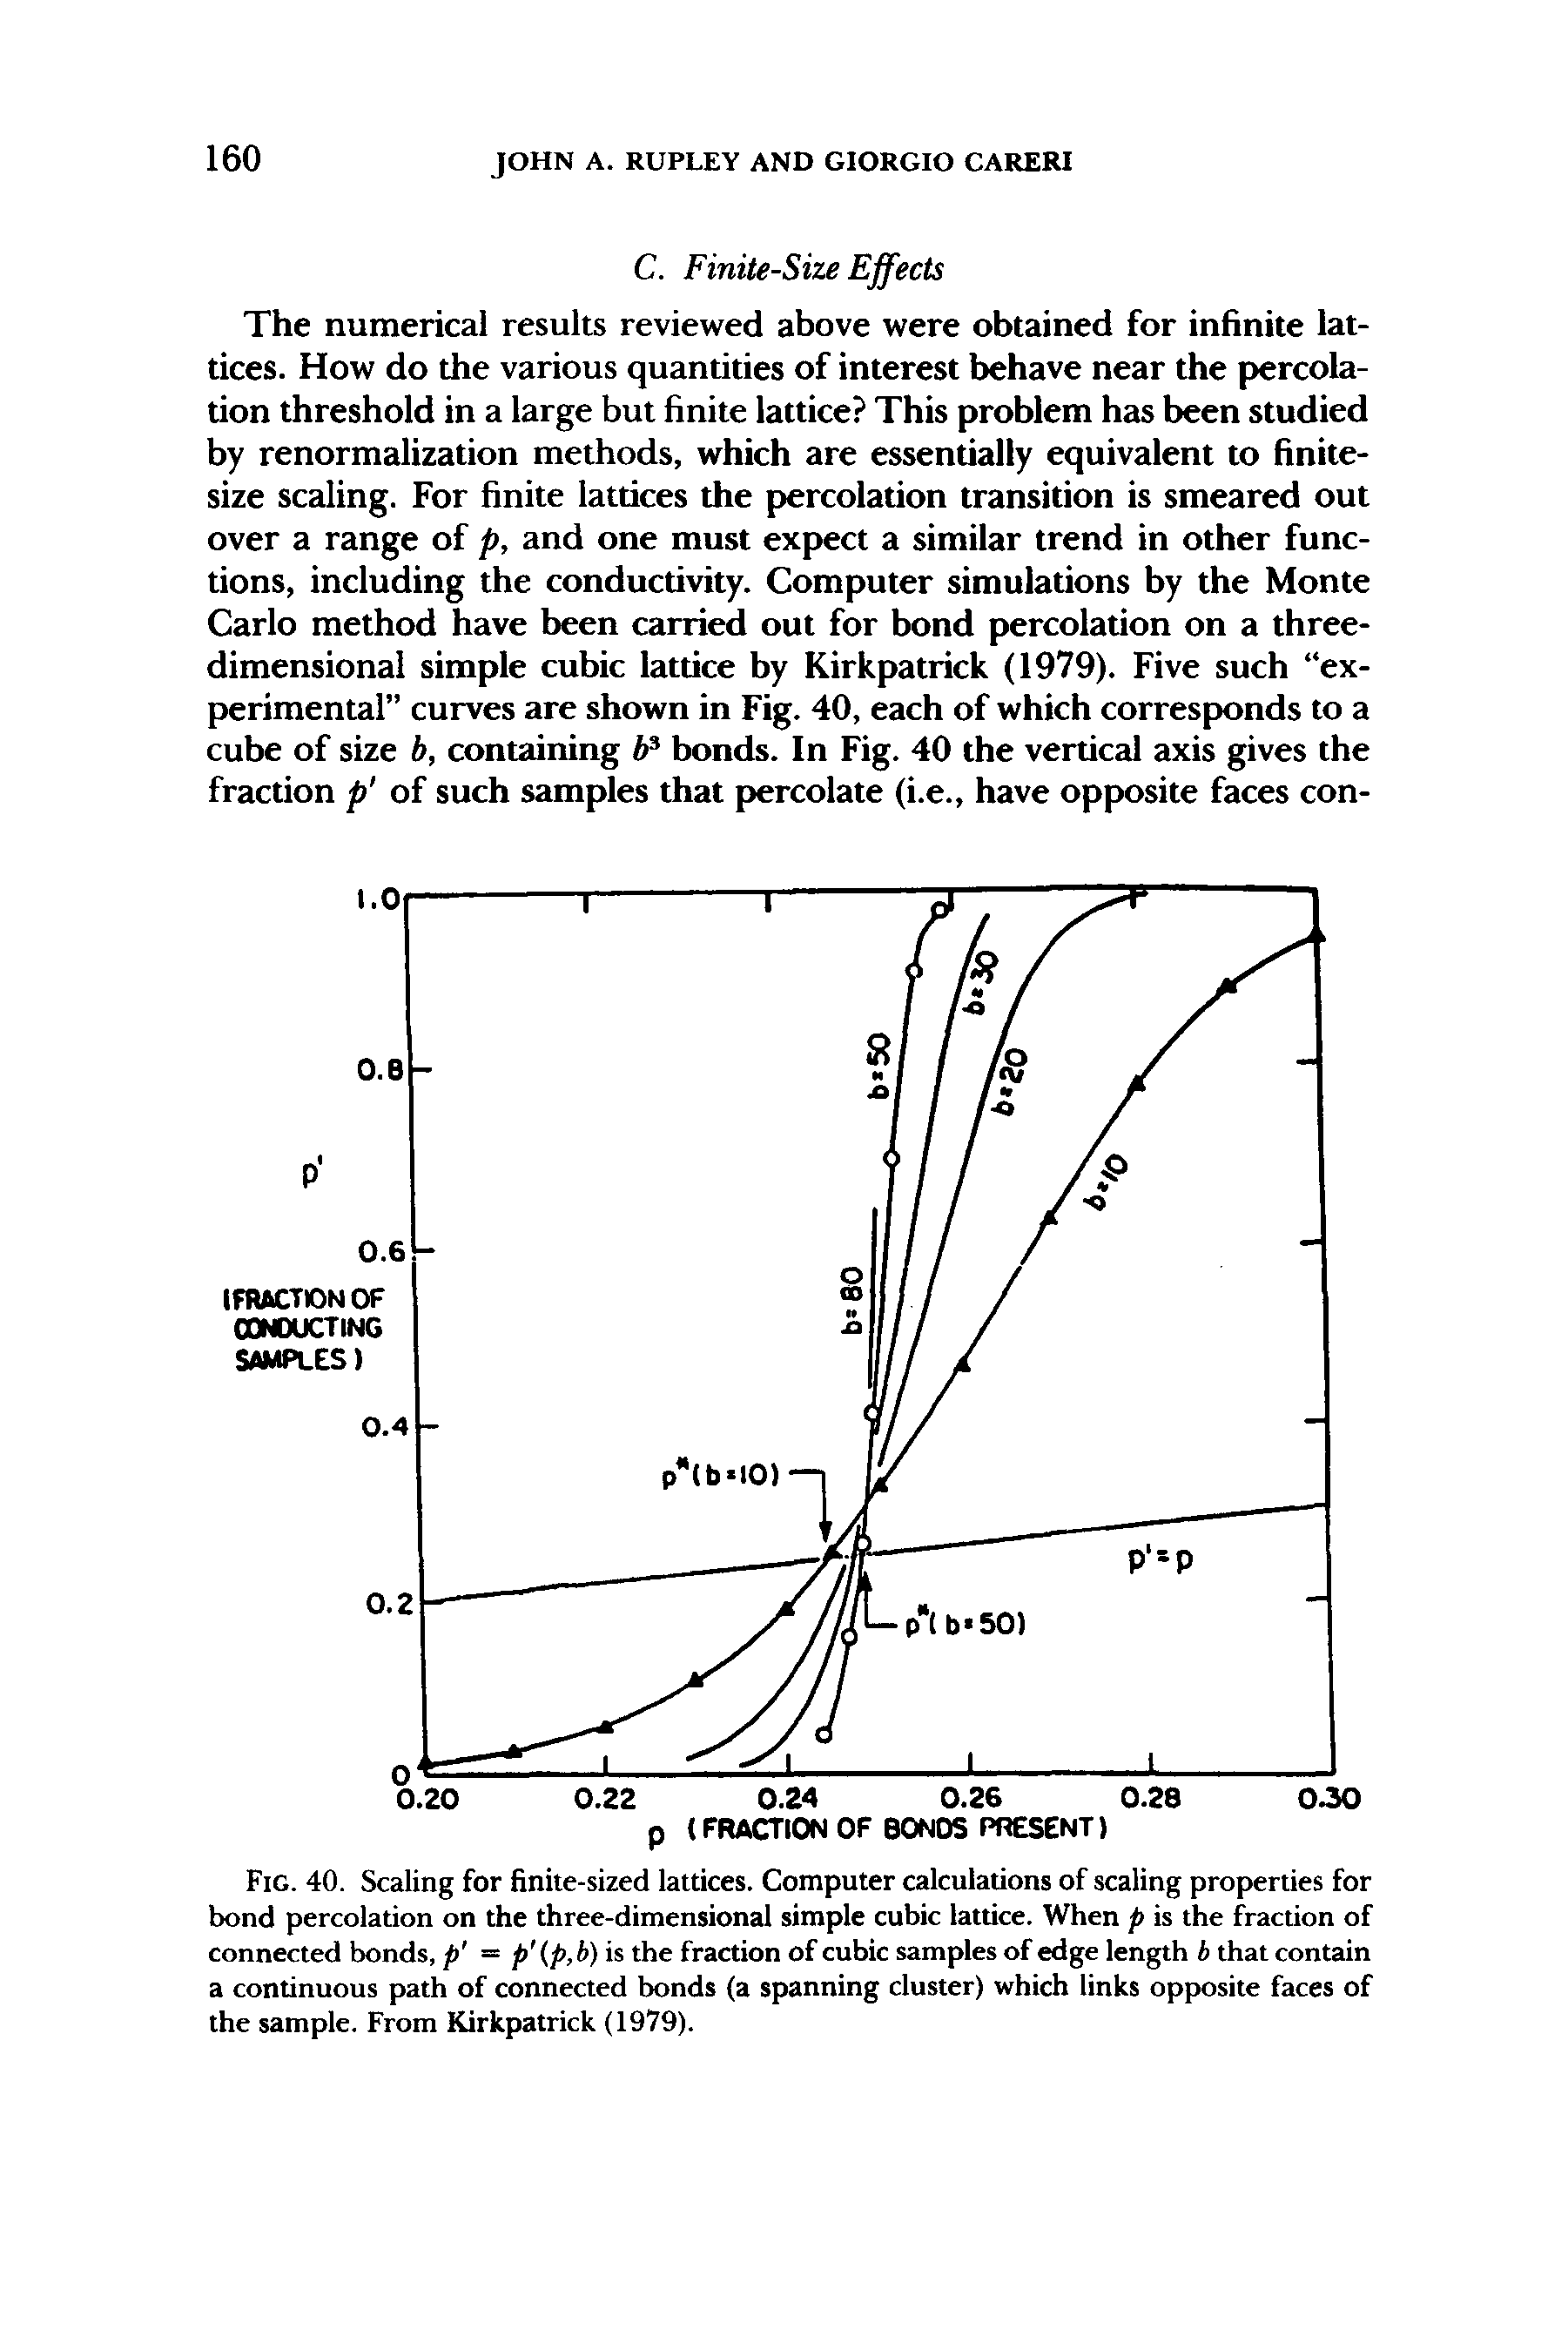 Fig. 40. Scaling for finite-sized lattices. Computer calculations of scaling properties for bond percolation on the three-dimensional simple cubic lattice. When p is the fraction of connected bonds, p = p (p,b) is the fraction of cubic samples of edge length b that contain a continuous path of connected bonds (a spanning cluster) which links opposite faces of the sample. From Kirkpatrick (1979).